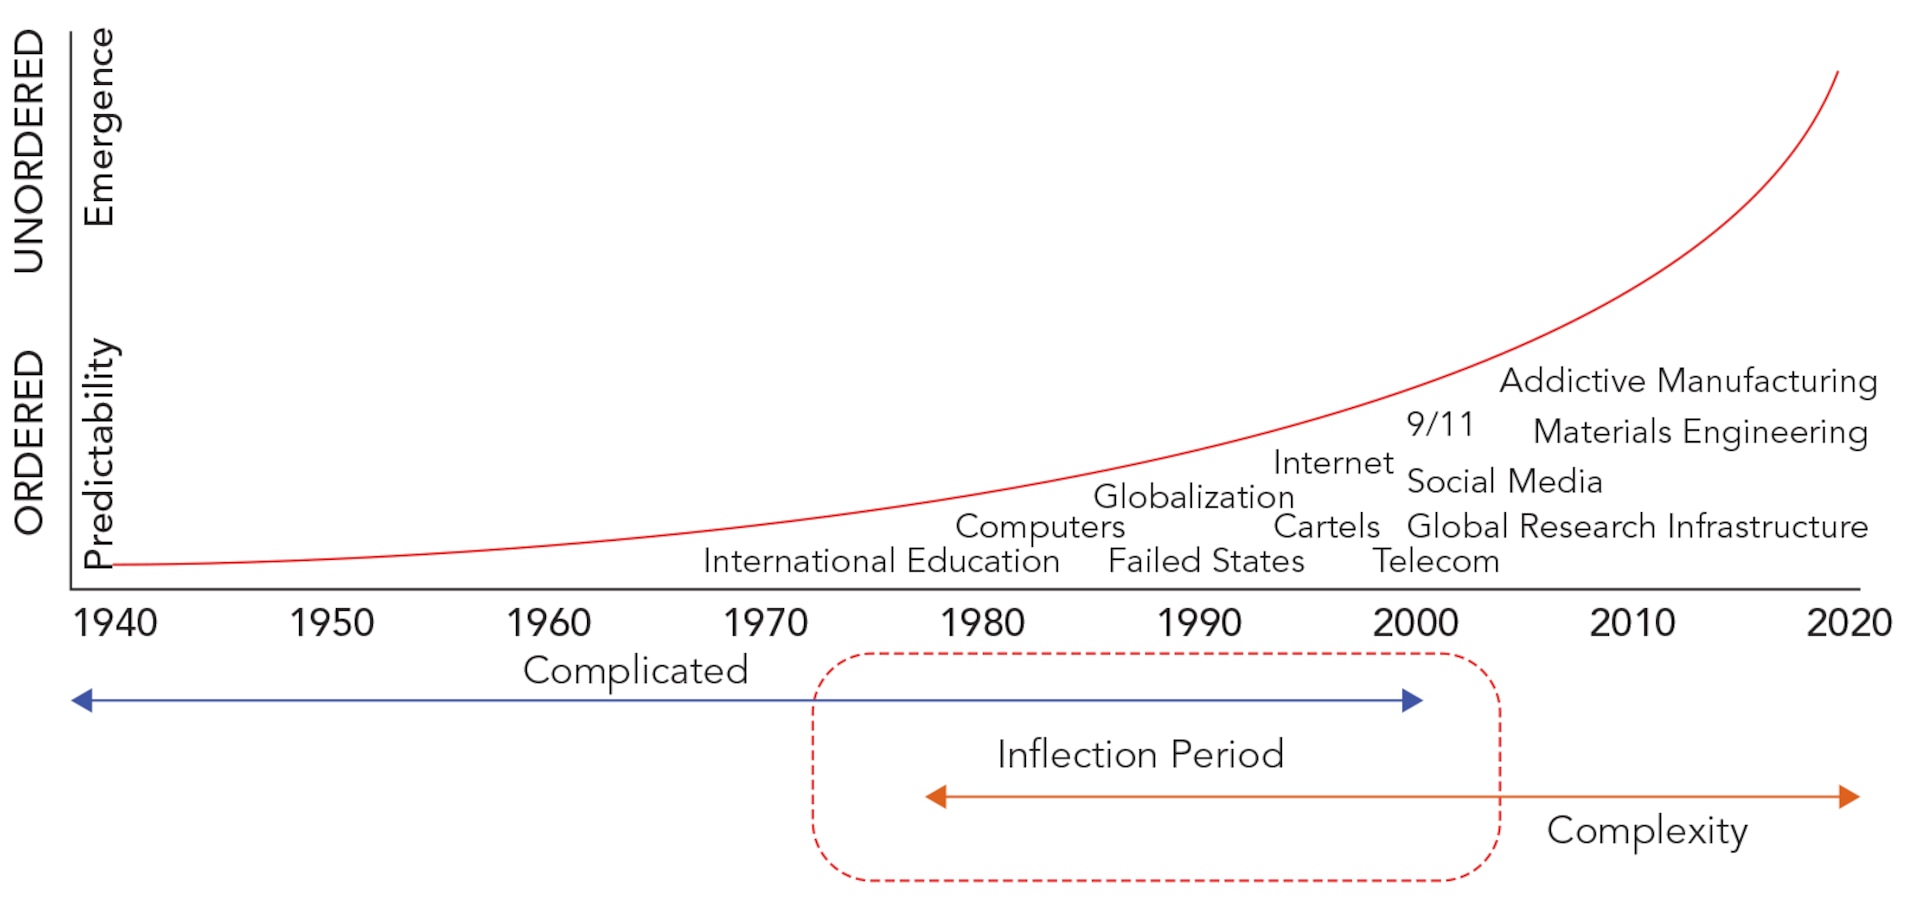 Figure 2 illustrates the complexity in the WMD proliferation systems that began in the 1970s with the convergence of a multiple factors.